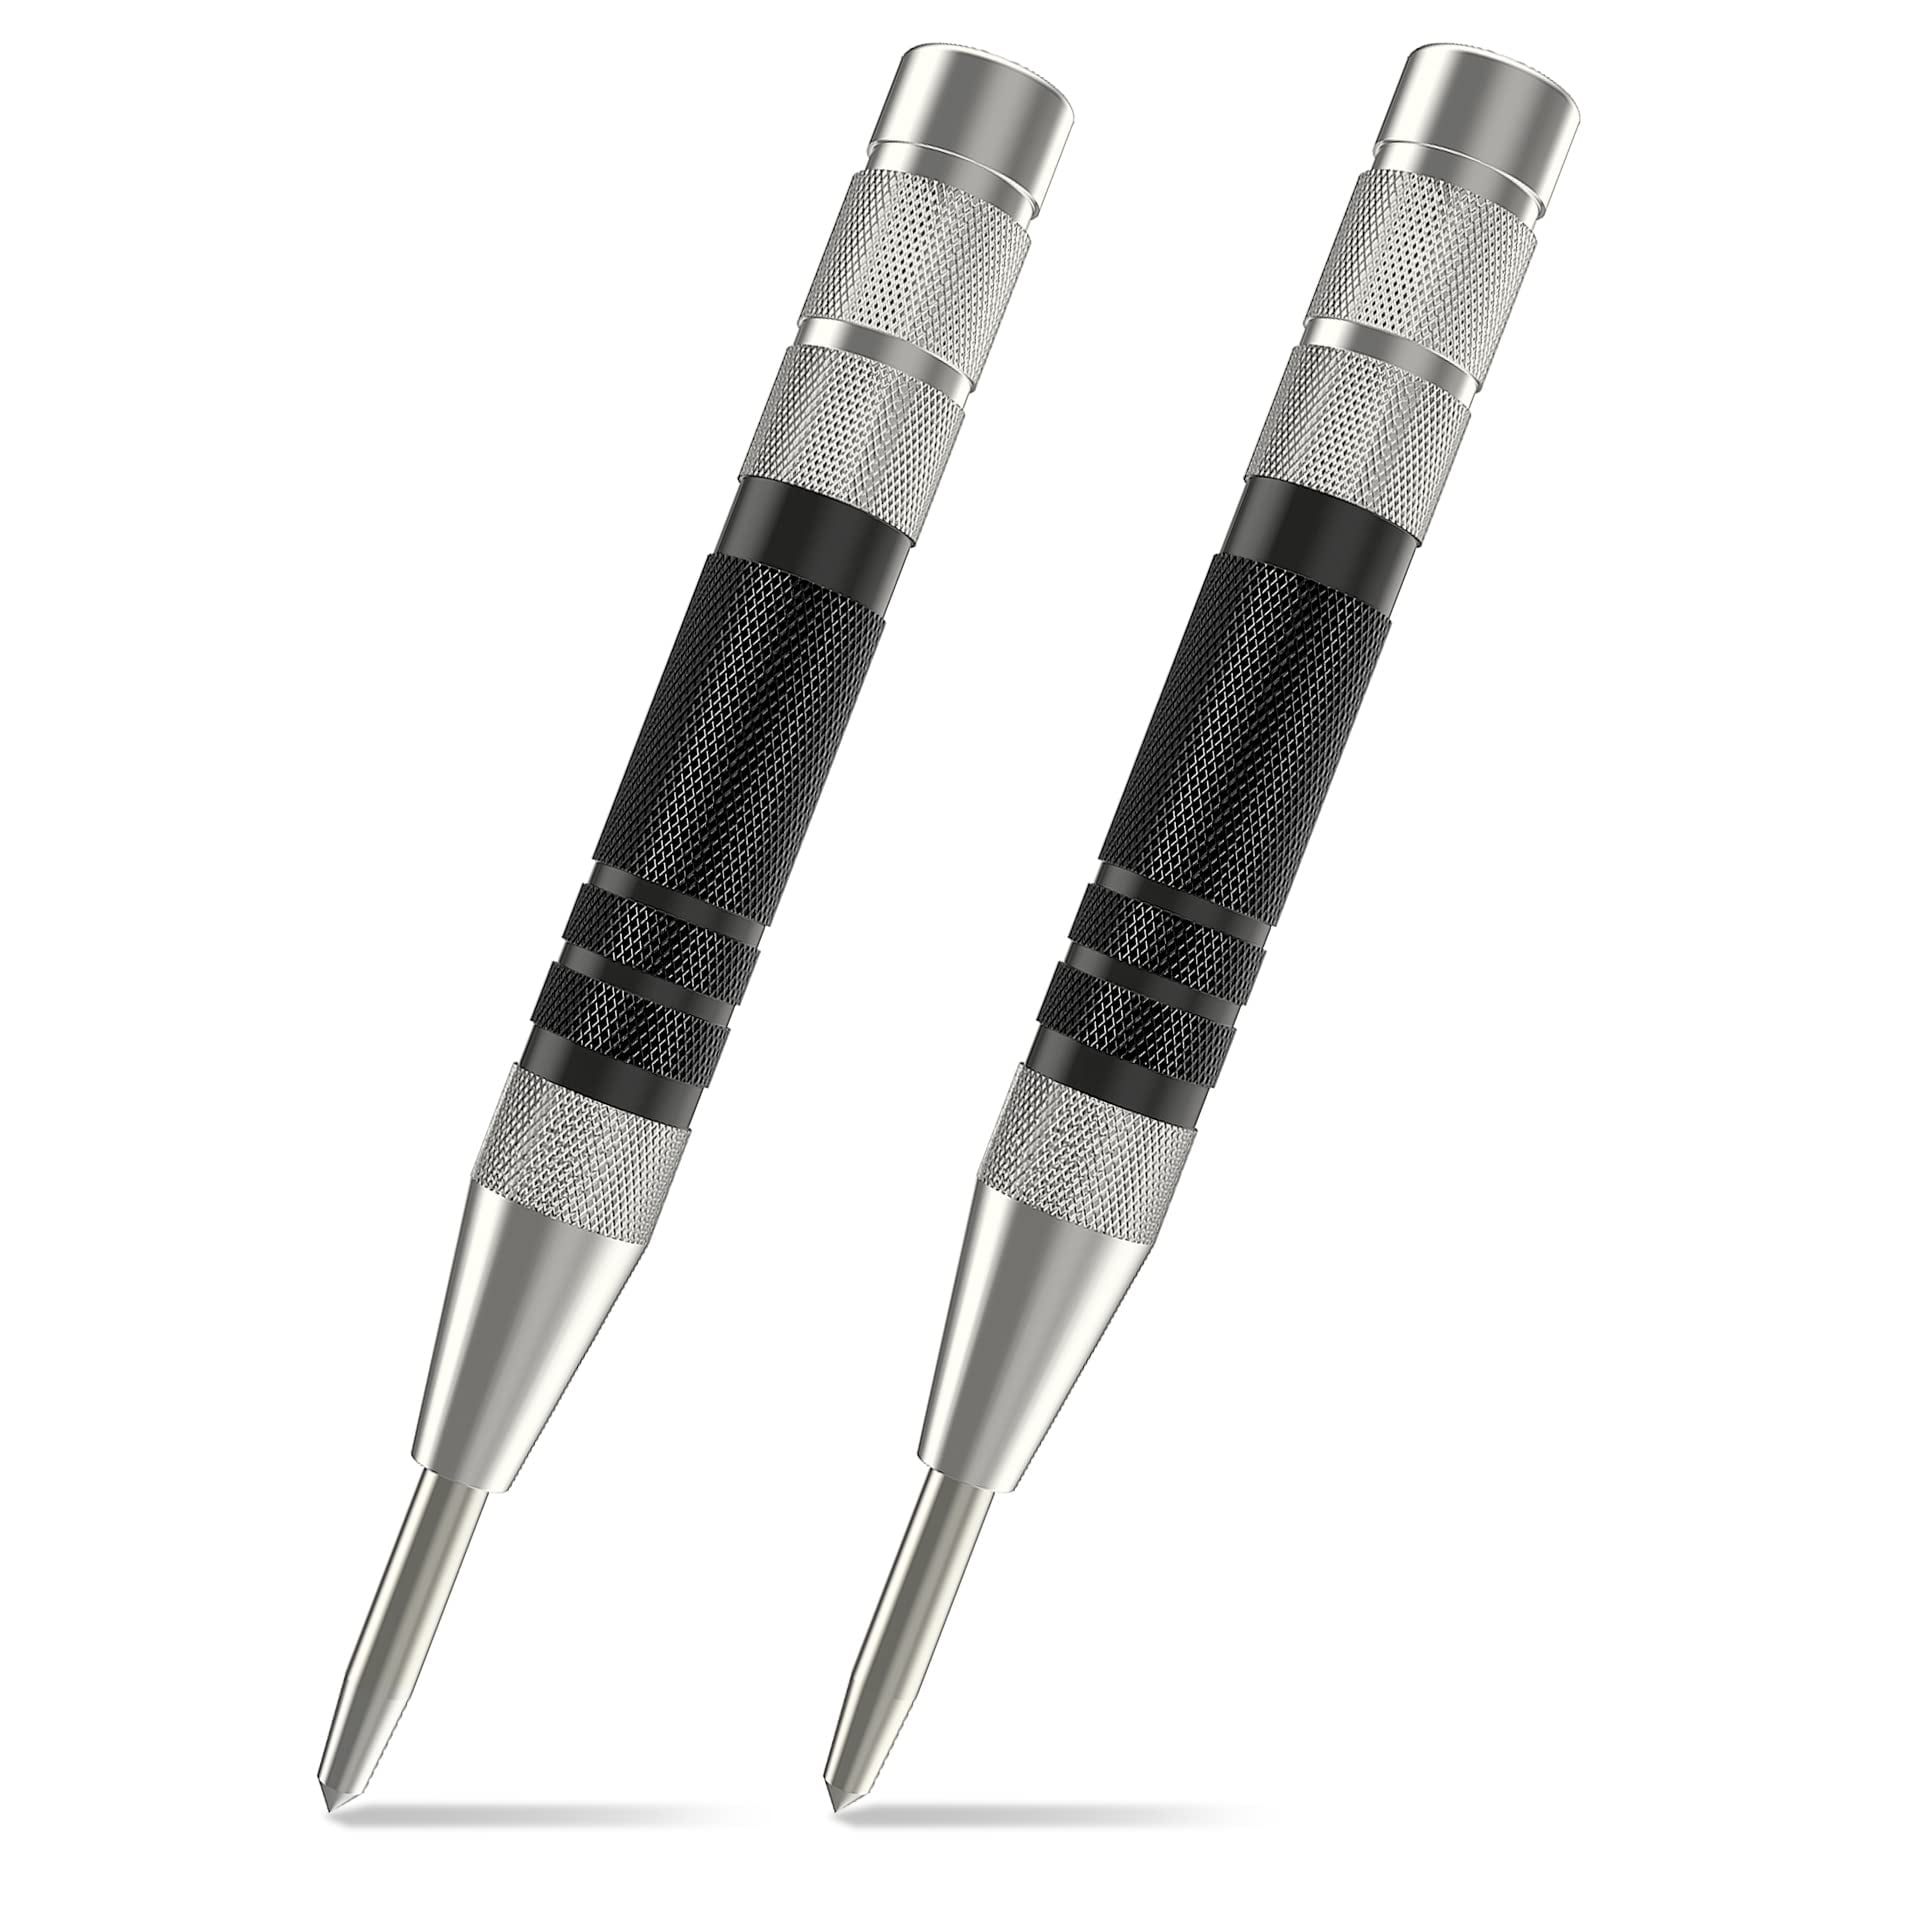 Hilbertbrook Automatic Center Punch 5 inch Spring Loaded Center Punch Adjustable Tension Punch Tool for Metal Wood Glass Plastic(2 Pack)